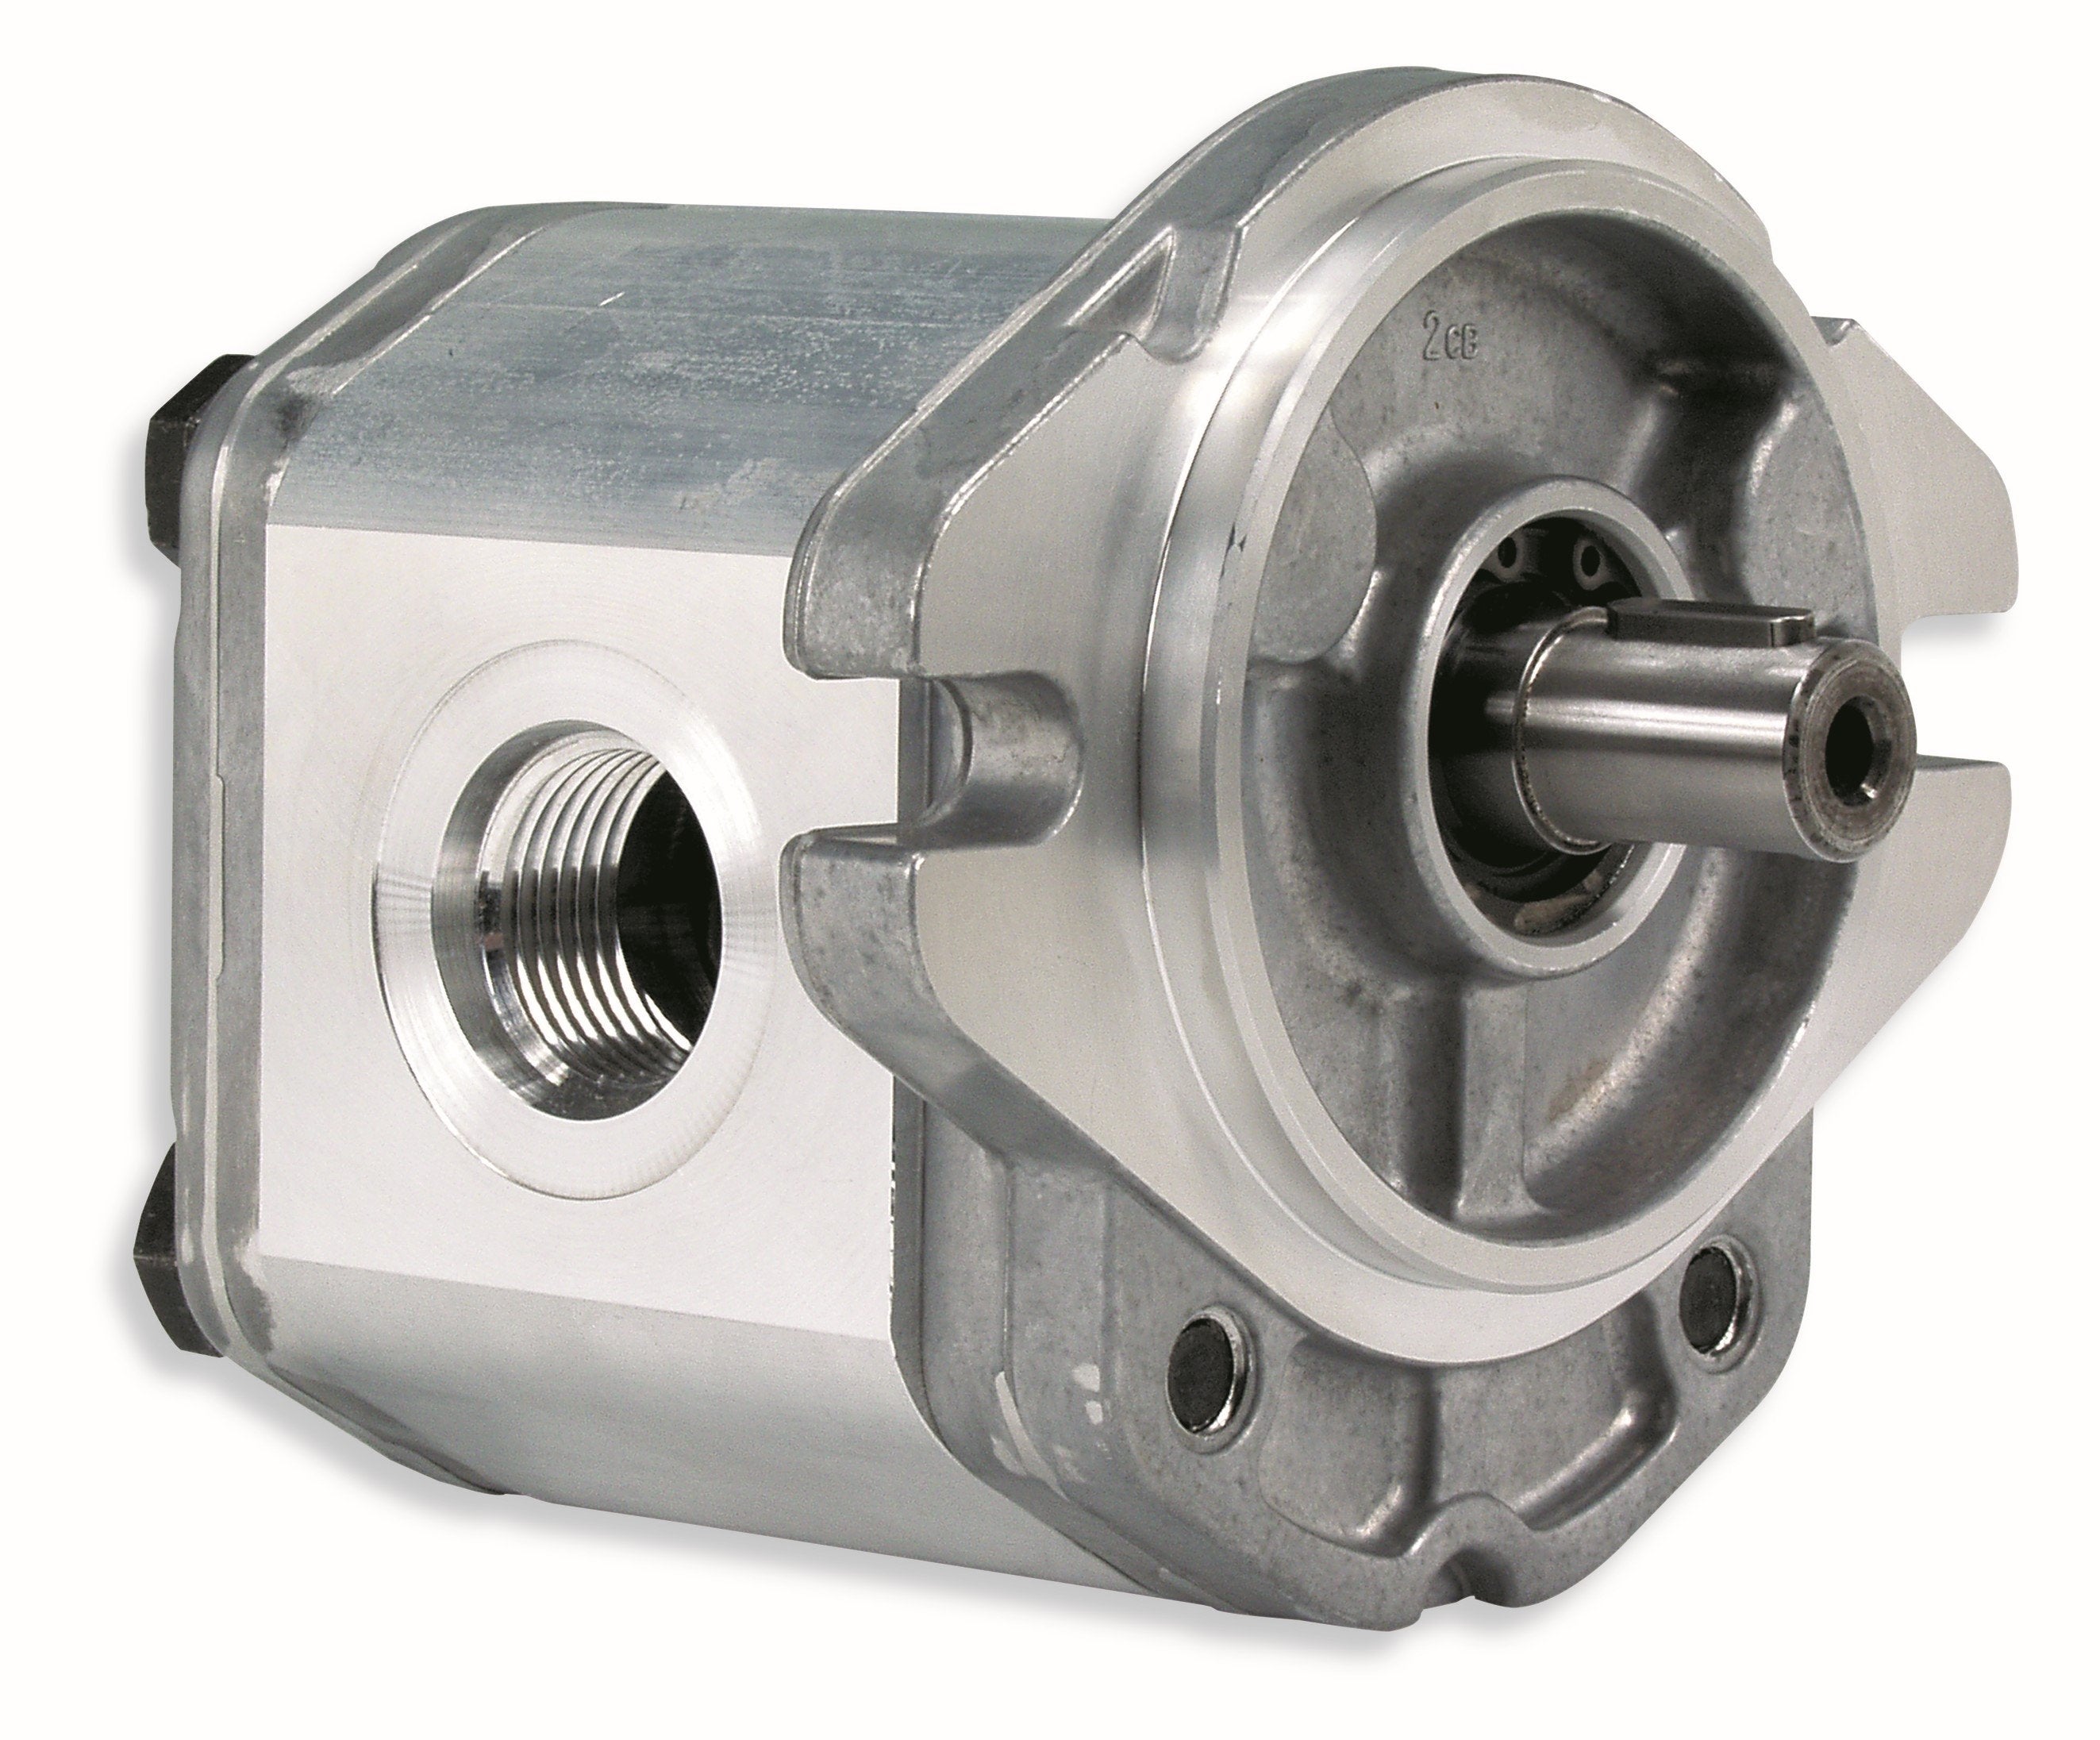 GHM2A-R-40-S1-E2 : Marzocchi Gear Motor, Bidirectional, 28.2cc, 2900psi rated, 1800RPM, 0.75 (3/4") #12 SAE ports, 9T 16/32DP Splined Shaft